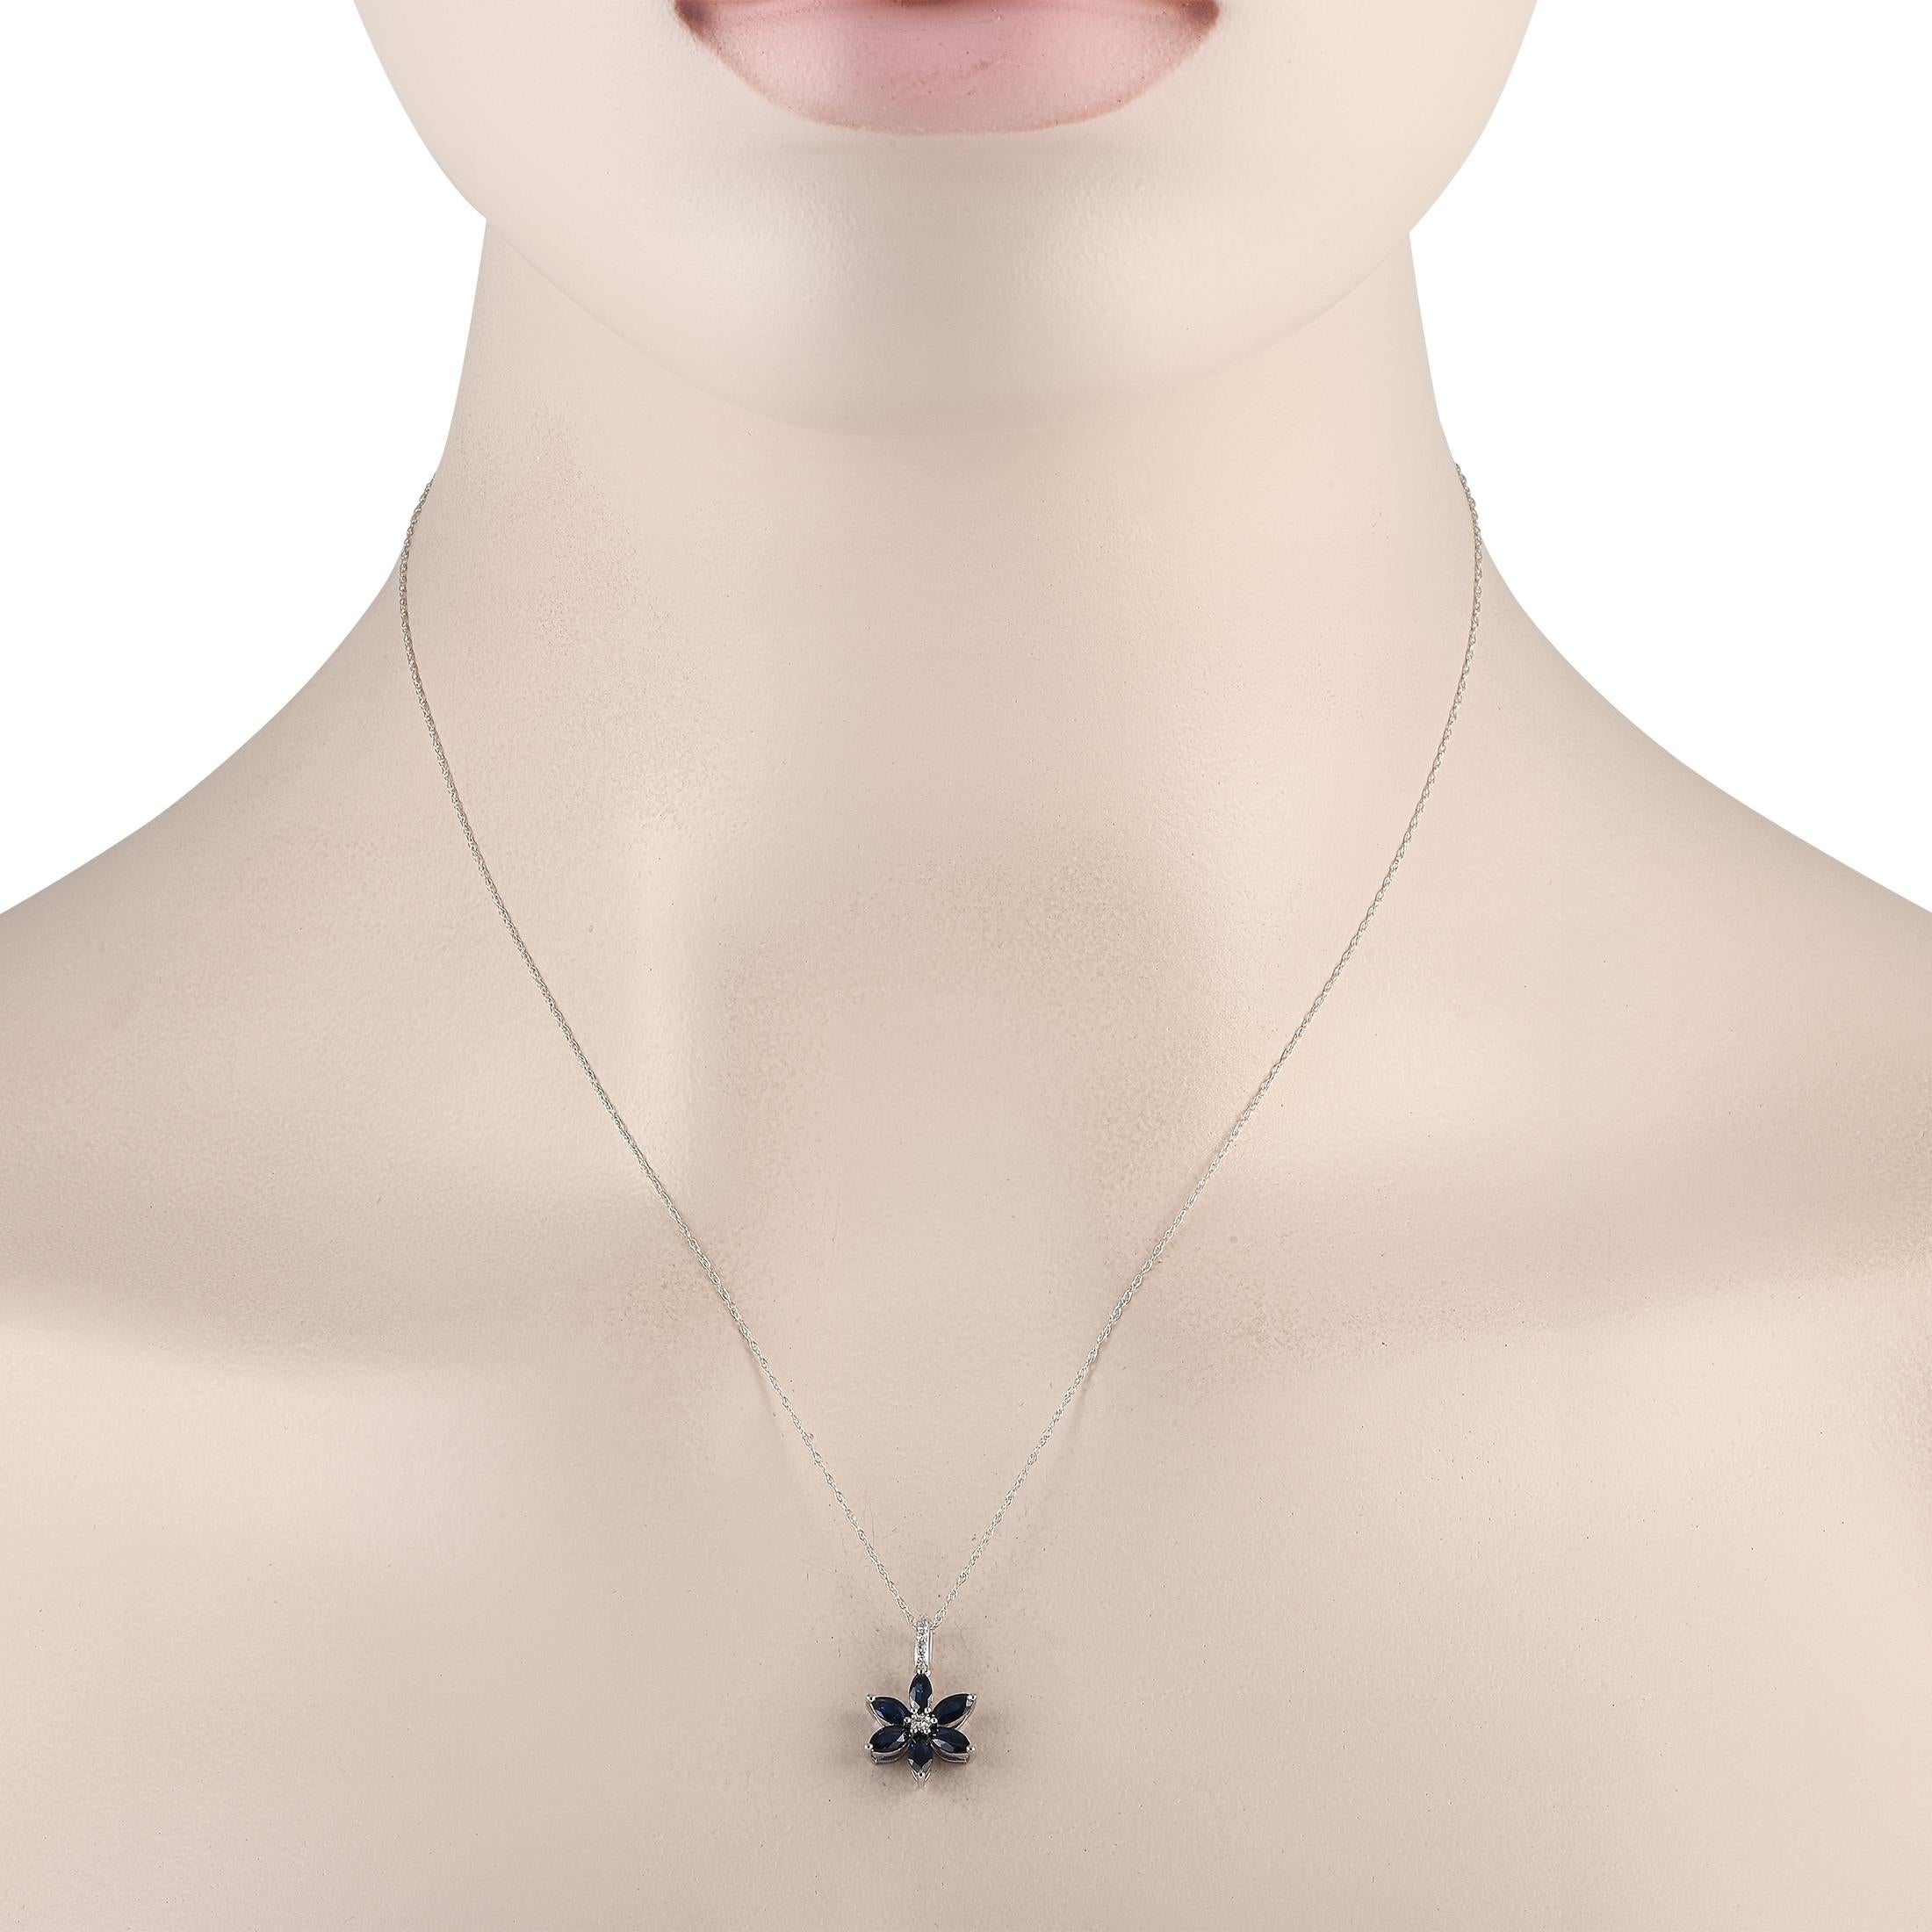 This diamond and sapphire floral necklace is what will soon be your favorite trinket. It is beautifully crafted in 14K white gold, with a double cable chain measuring 18 inches long. The flower-shaped pendant measures less than an inch in diameter